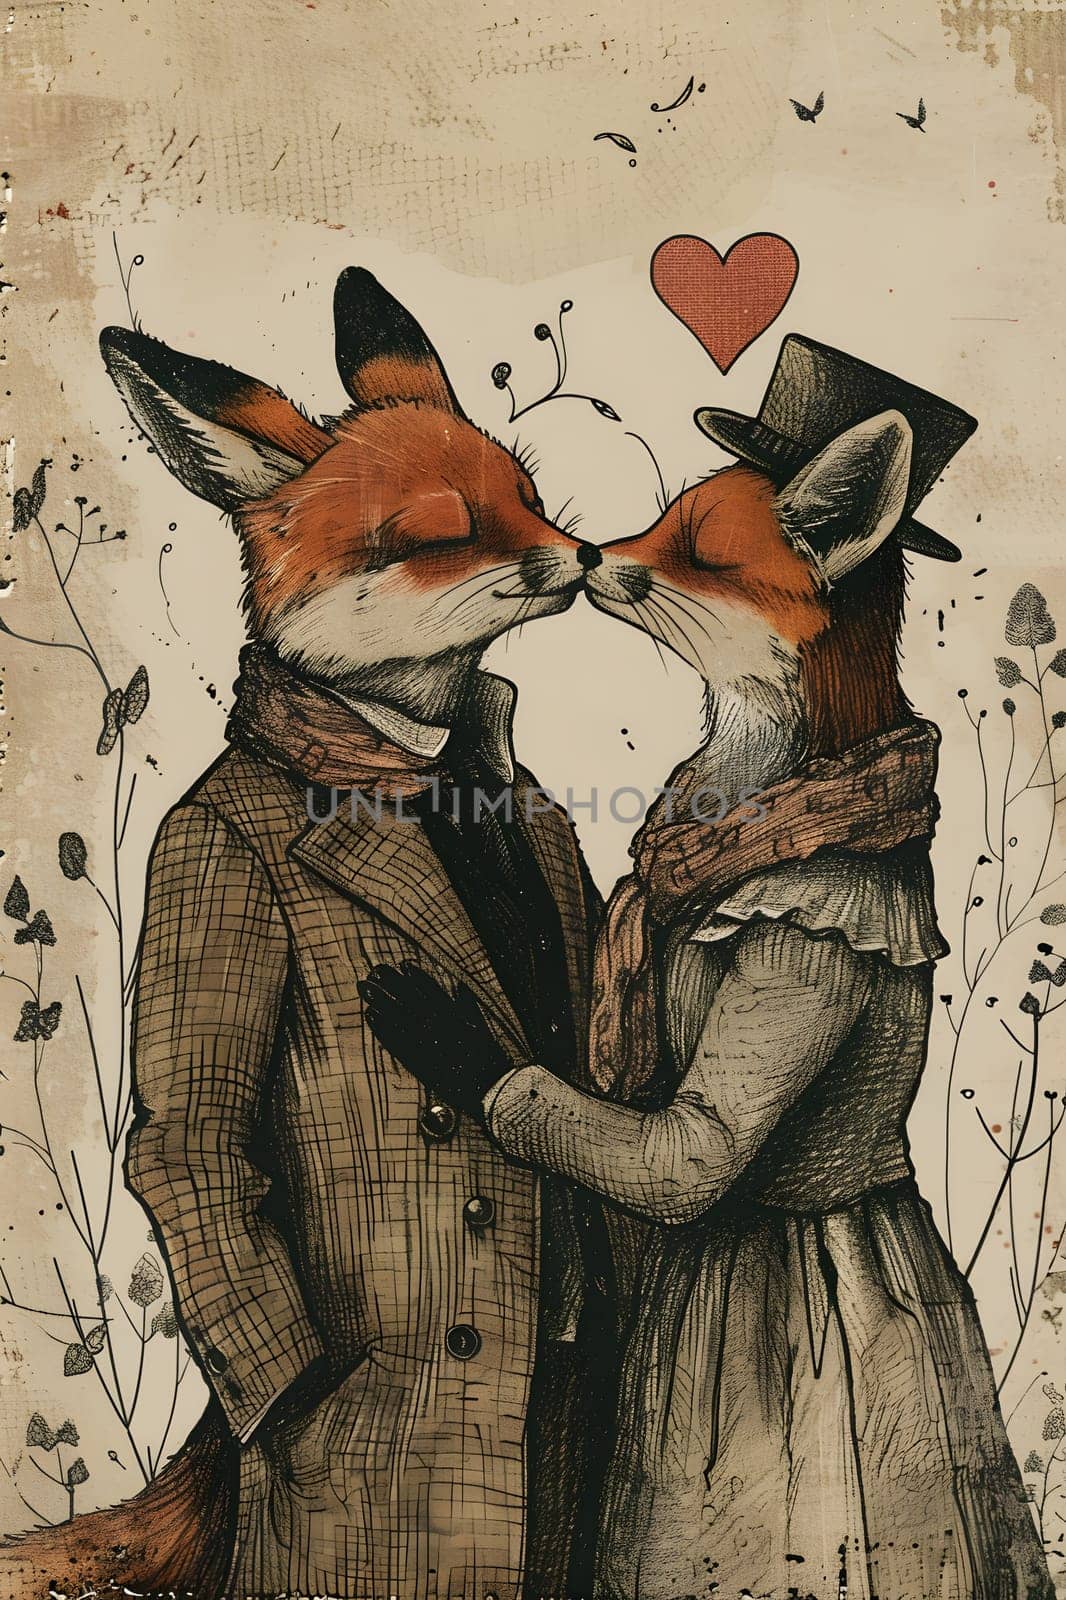 An art painting of two foxes kissing with a heart above them by Nadtochiy